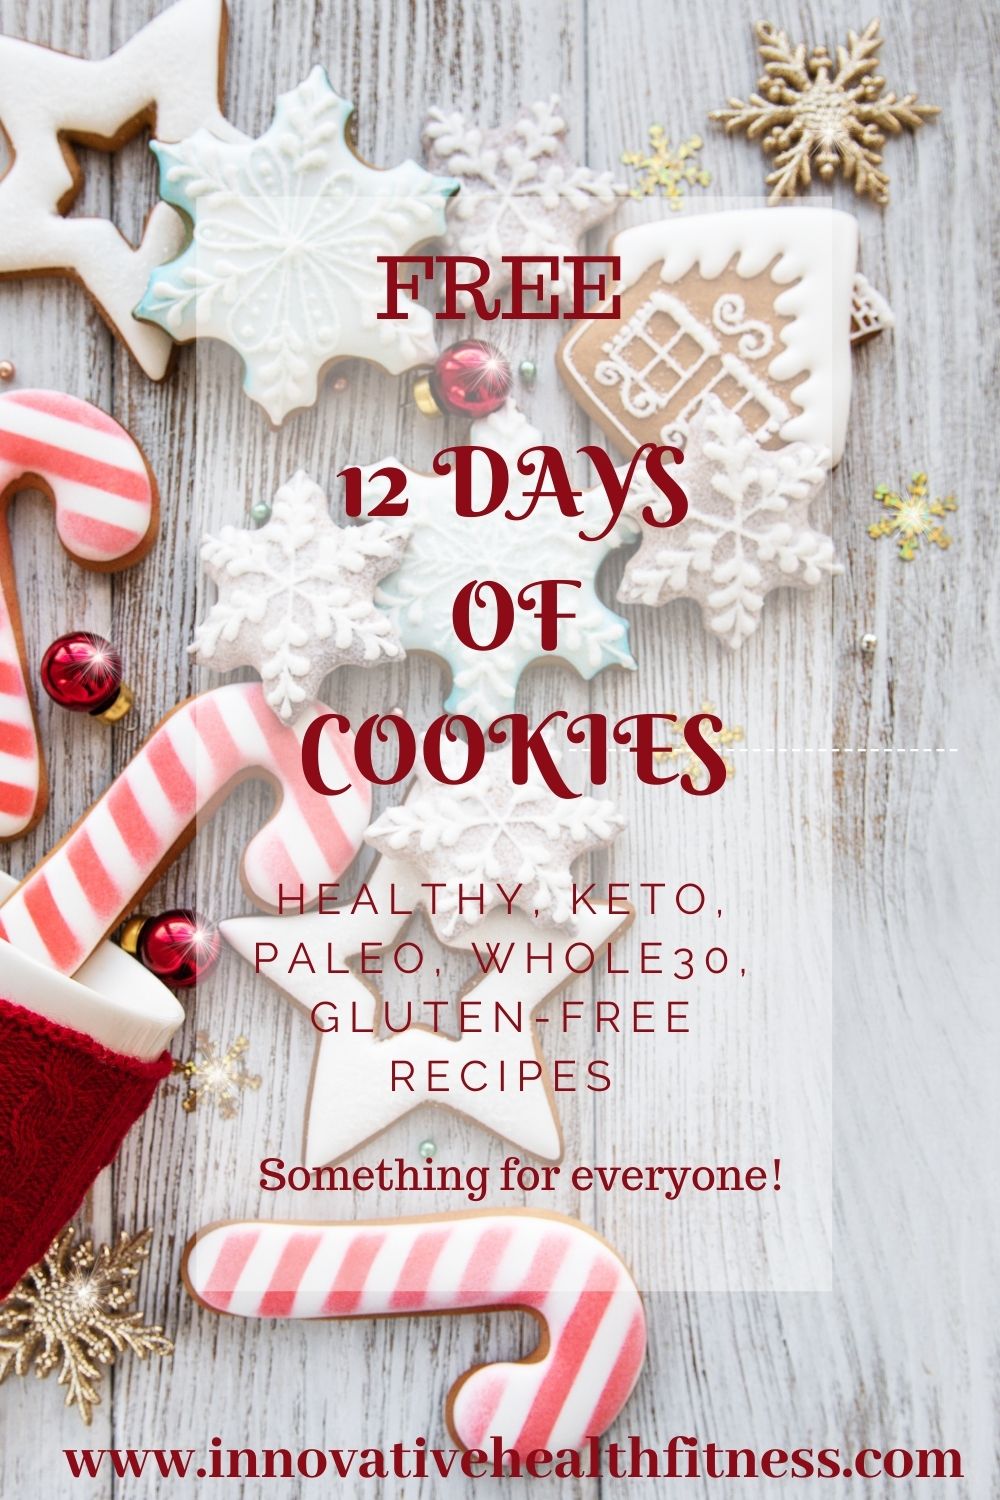 12 days of cookies https://mailchi.mp/9c5aa1bc1567/12-days-of-cookies